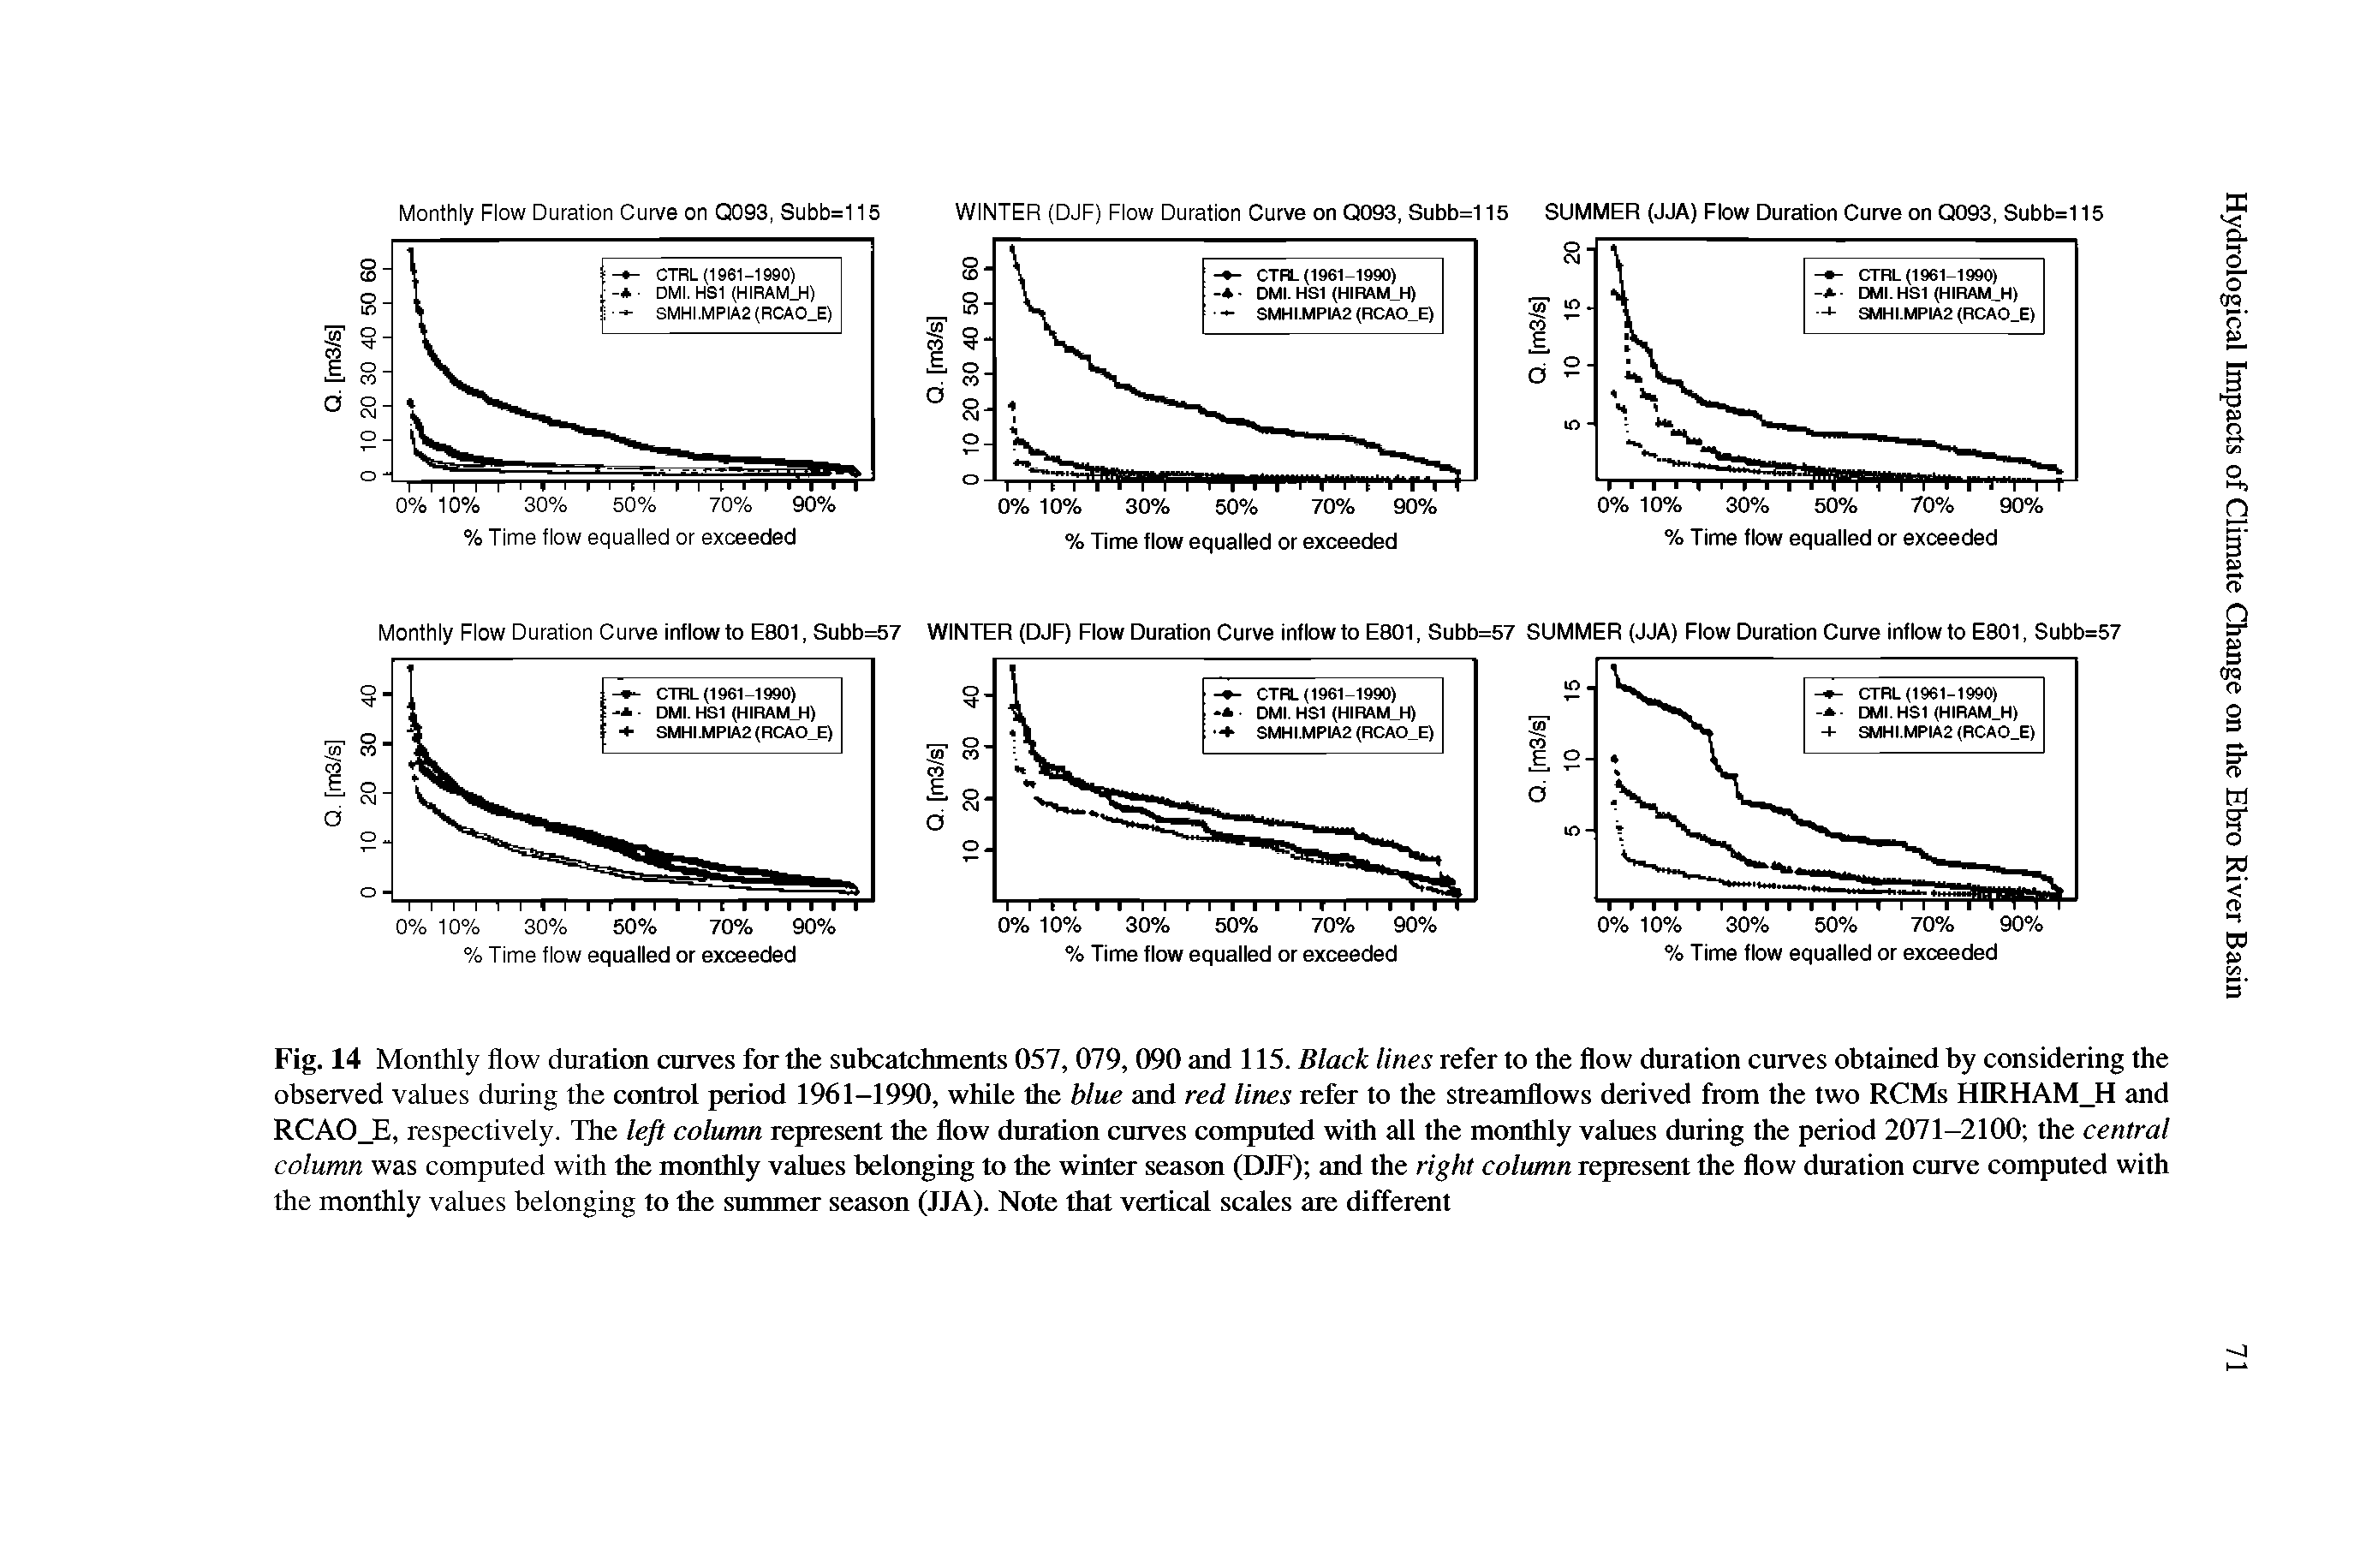 Fig. 14 Monthly flow duration curves for the subcatchments 057, 079, 090 and 115. Black lines refer to the flow duration curves obtained by considering the observed values during the control period 1961-1990, while the blue and red lines refer to the streamflows derived from the two RCMs HIRHAM H and RCAO E, respectively. The left column represent the flow duration curves computed with all the monthly values during the period 2071-2100 the central column was computed with the monthly values belonging to the winter season (DJF) and the right column represent the flow duration curve computed with the monthly values belonging to the summer season (JJA). Note that vertical scales are different...